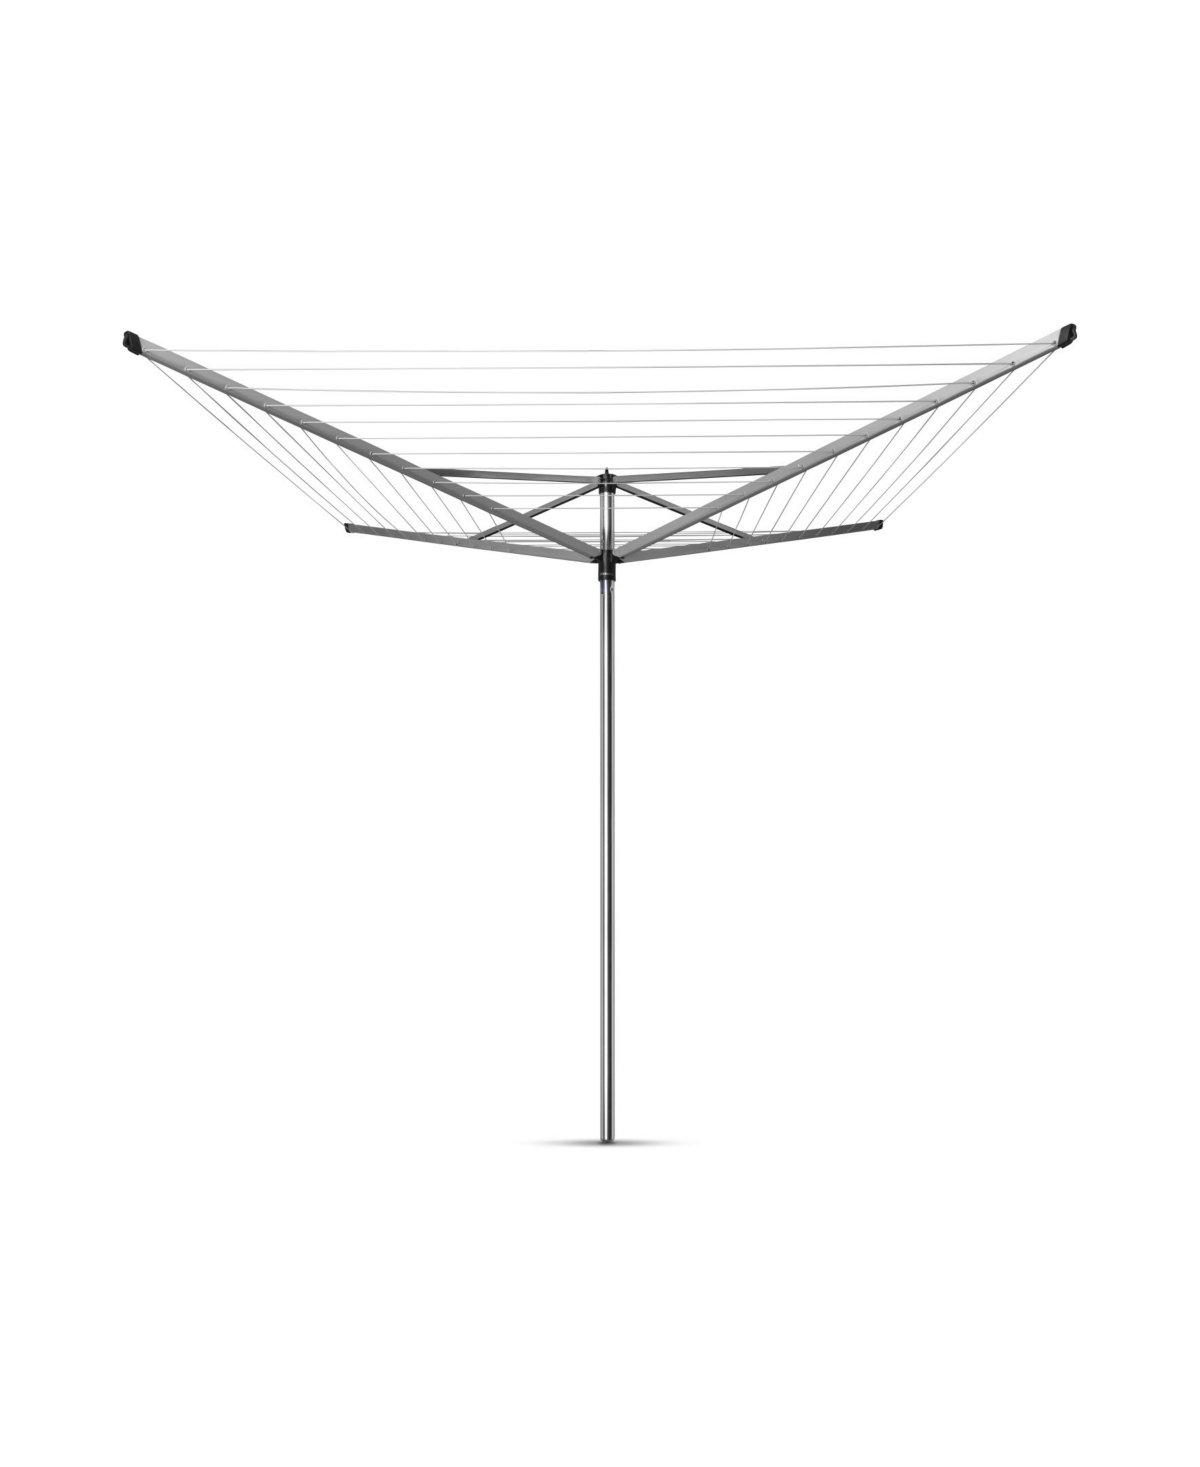 Brabantia Topspinner Clothesline 197' With Ground Spike In Silver